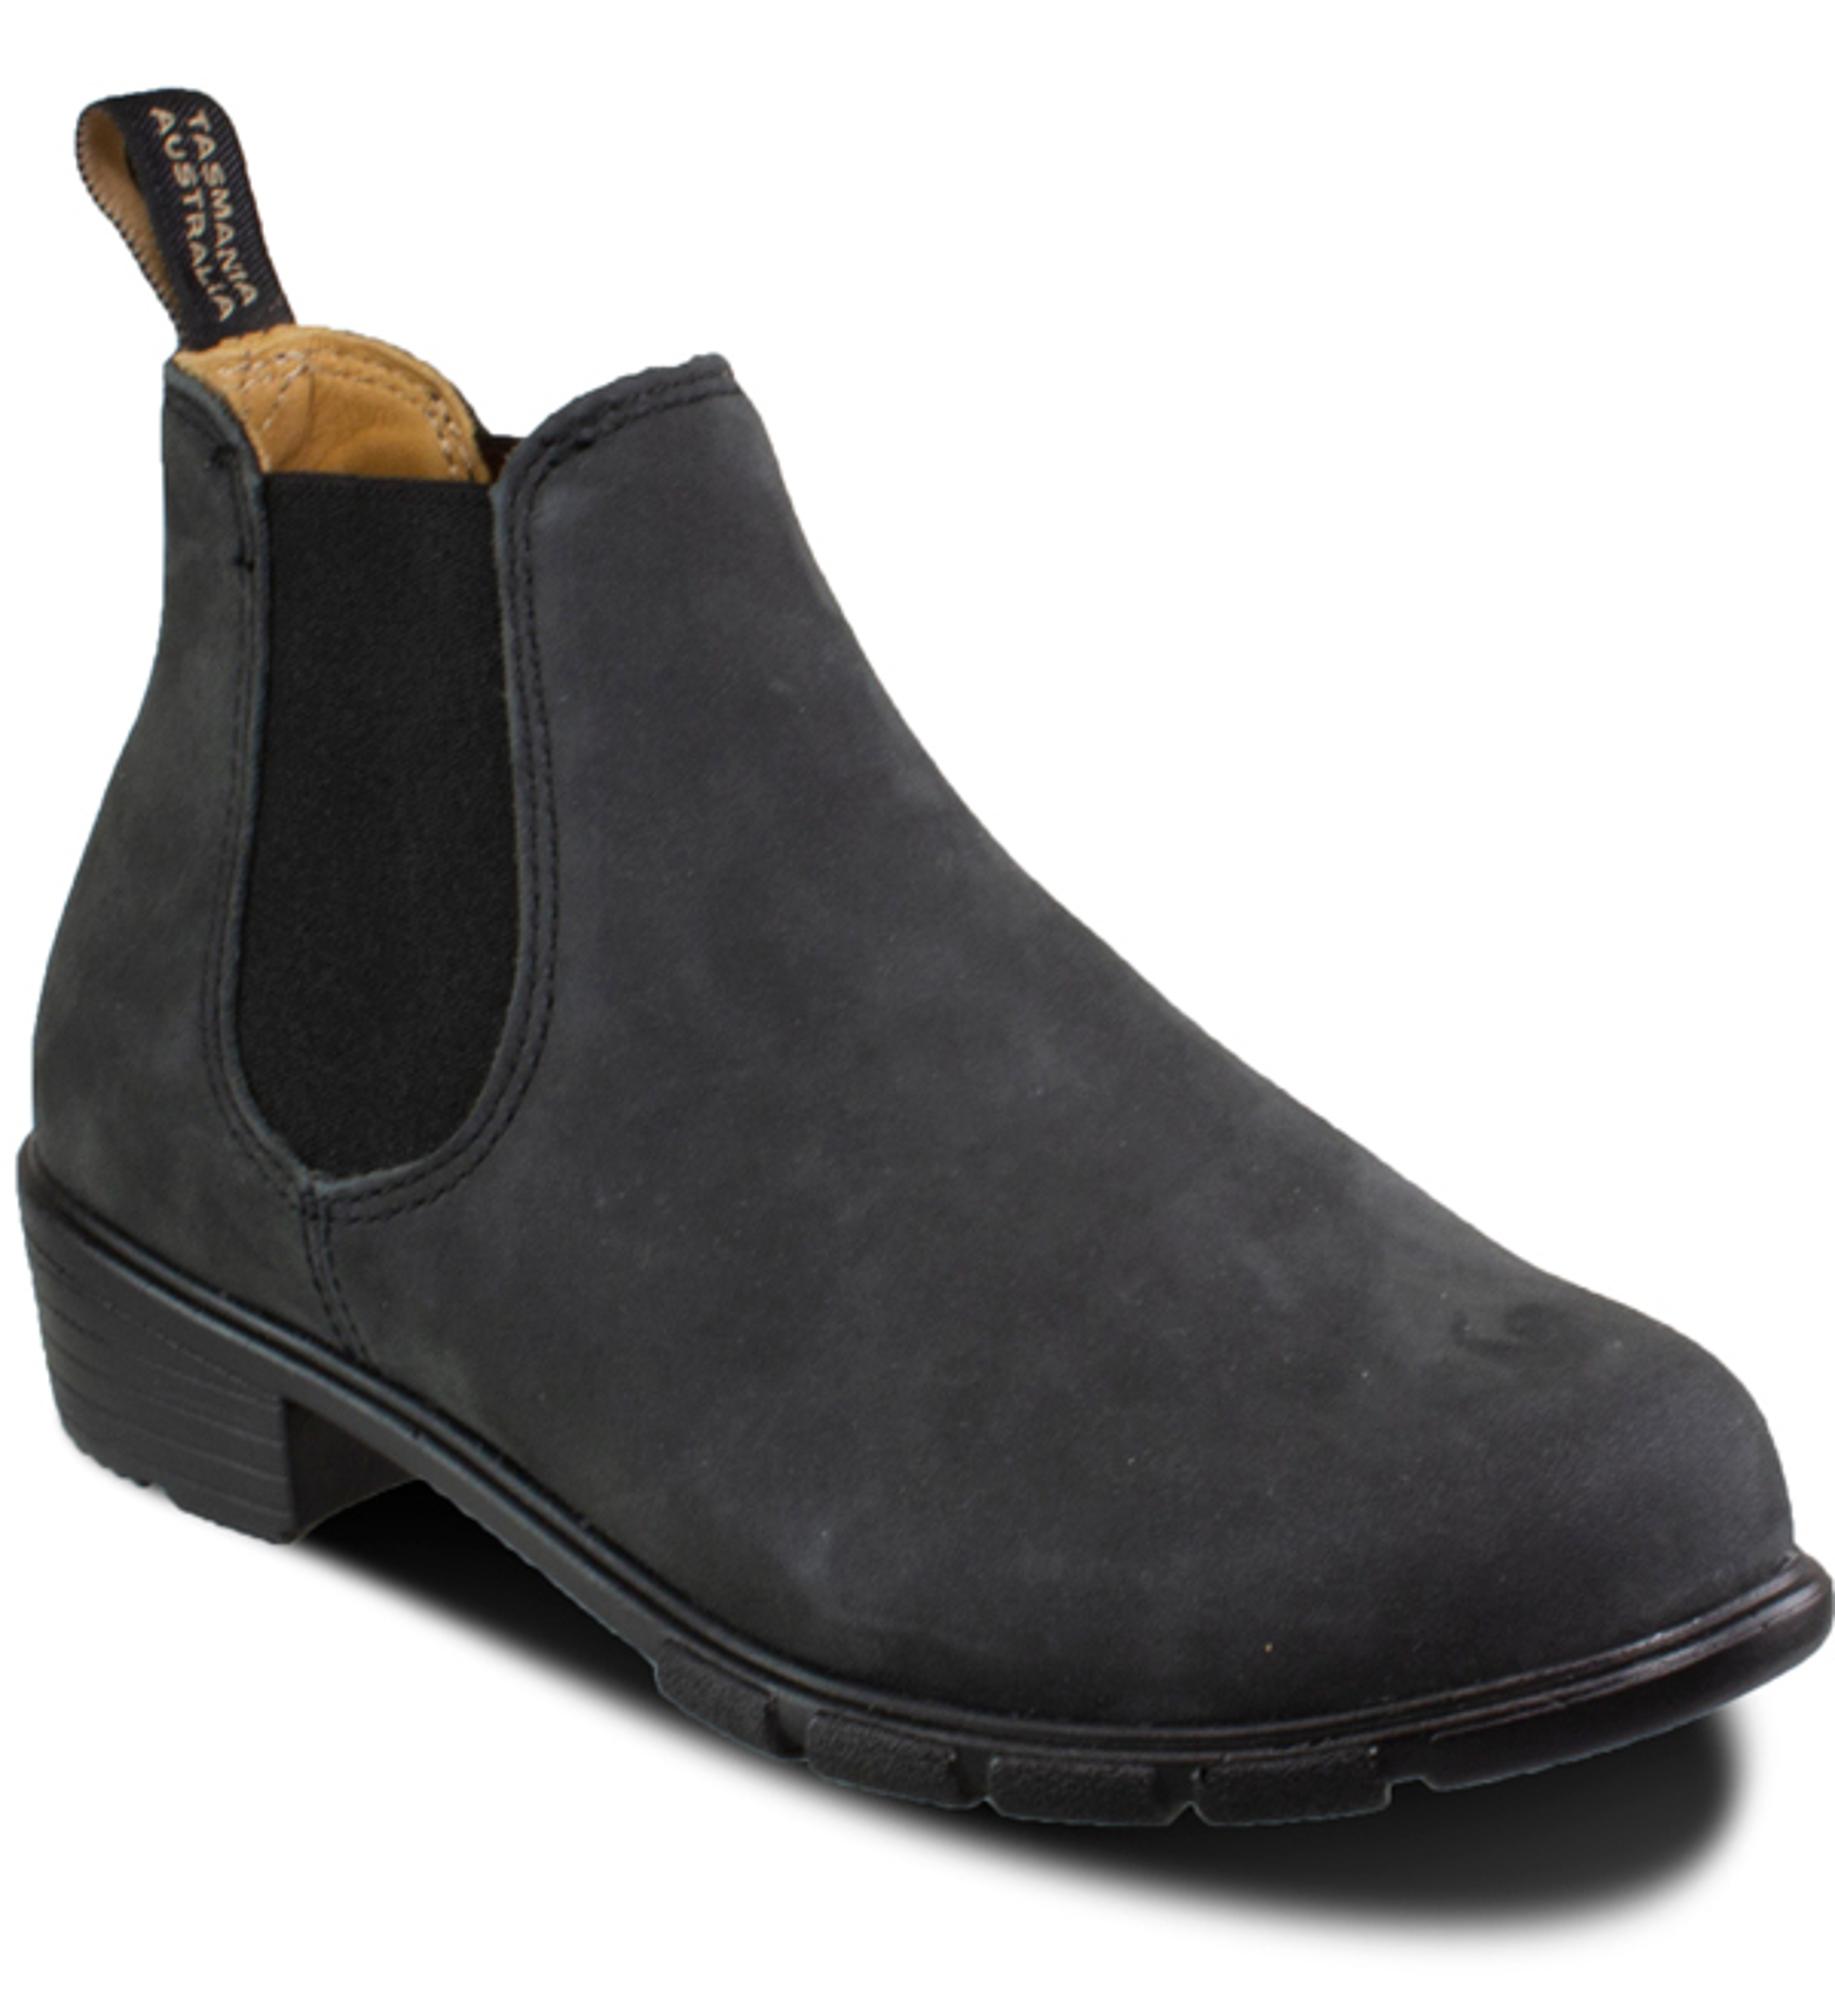 Womens 1971 Ankle - Rustic black 